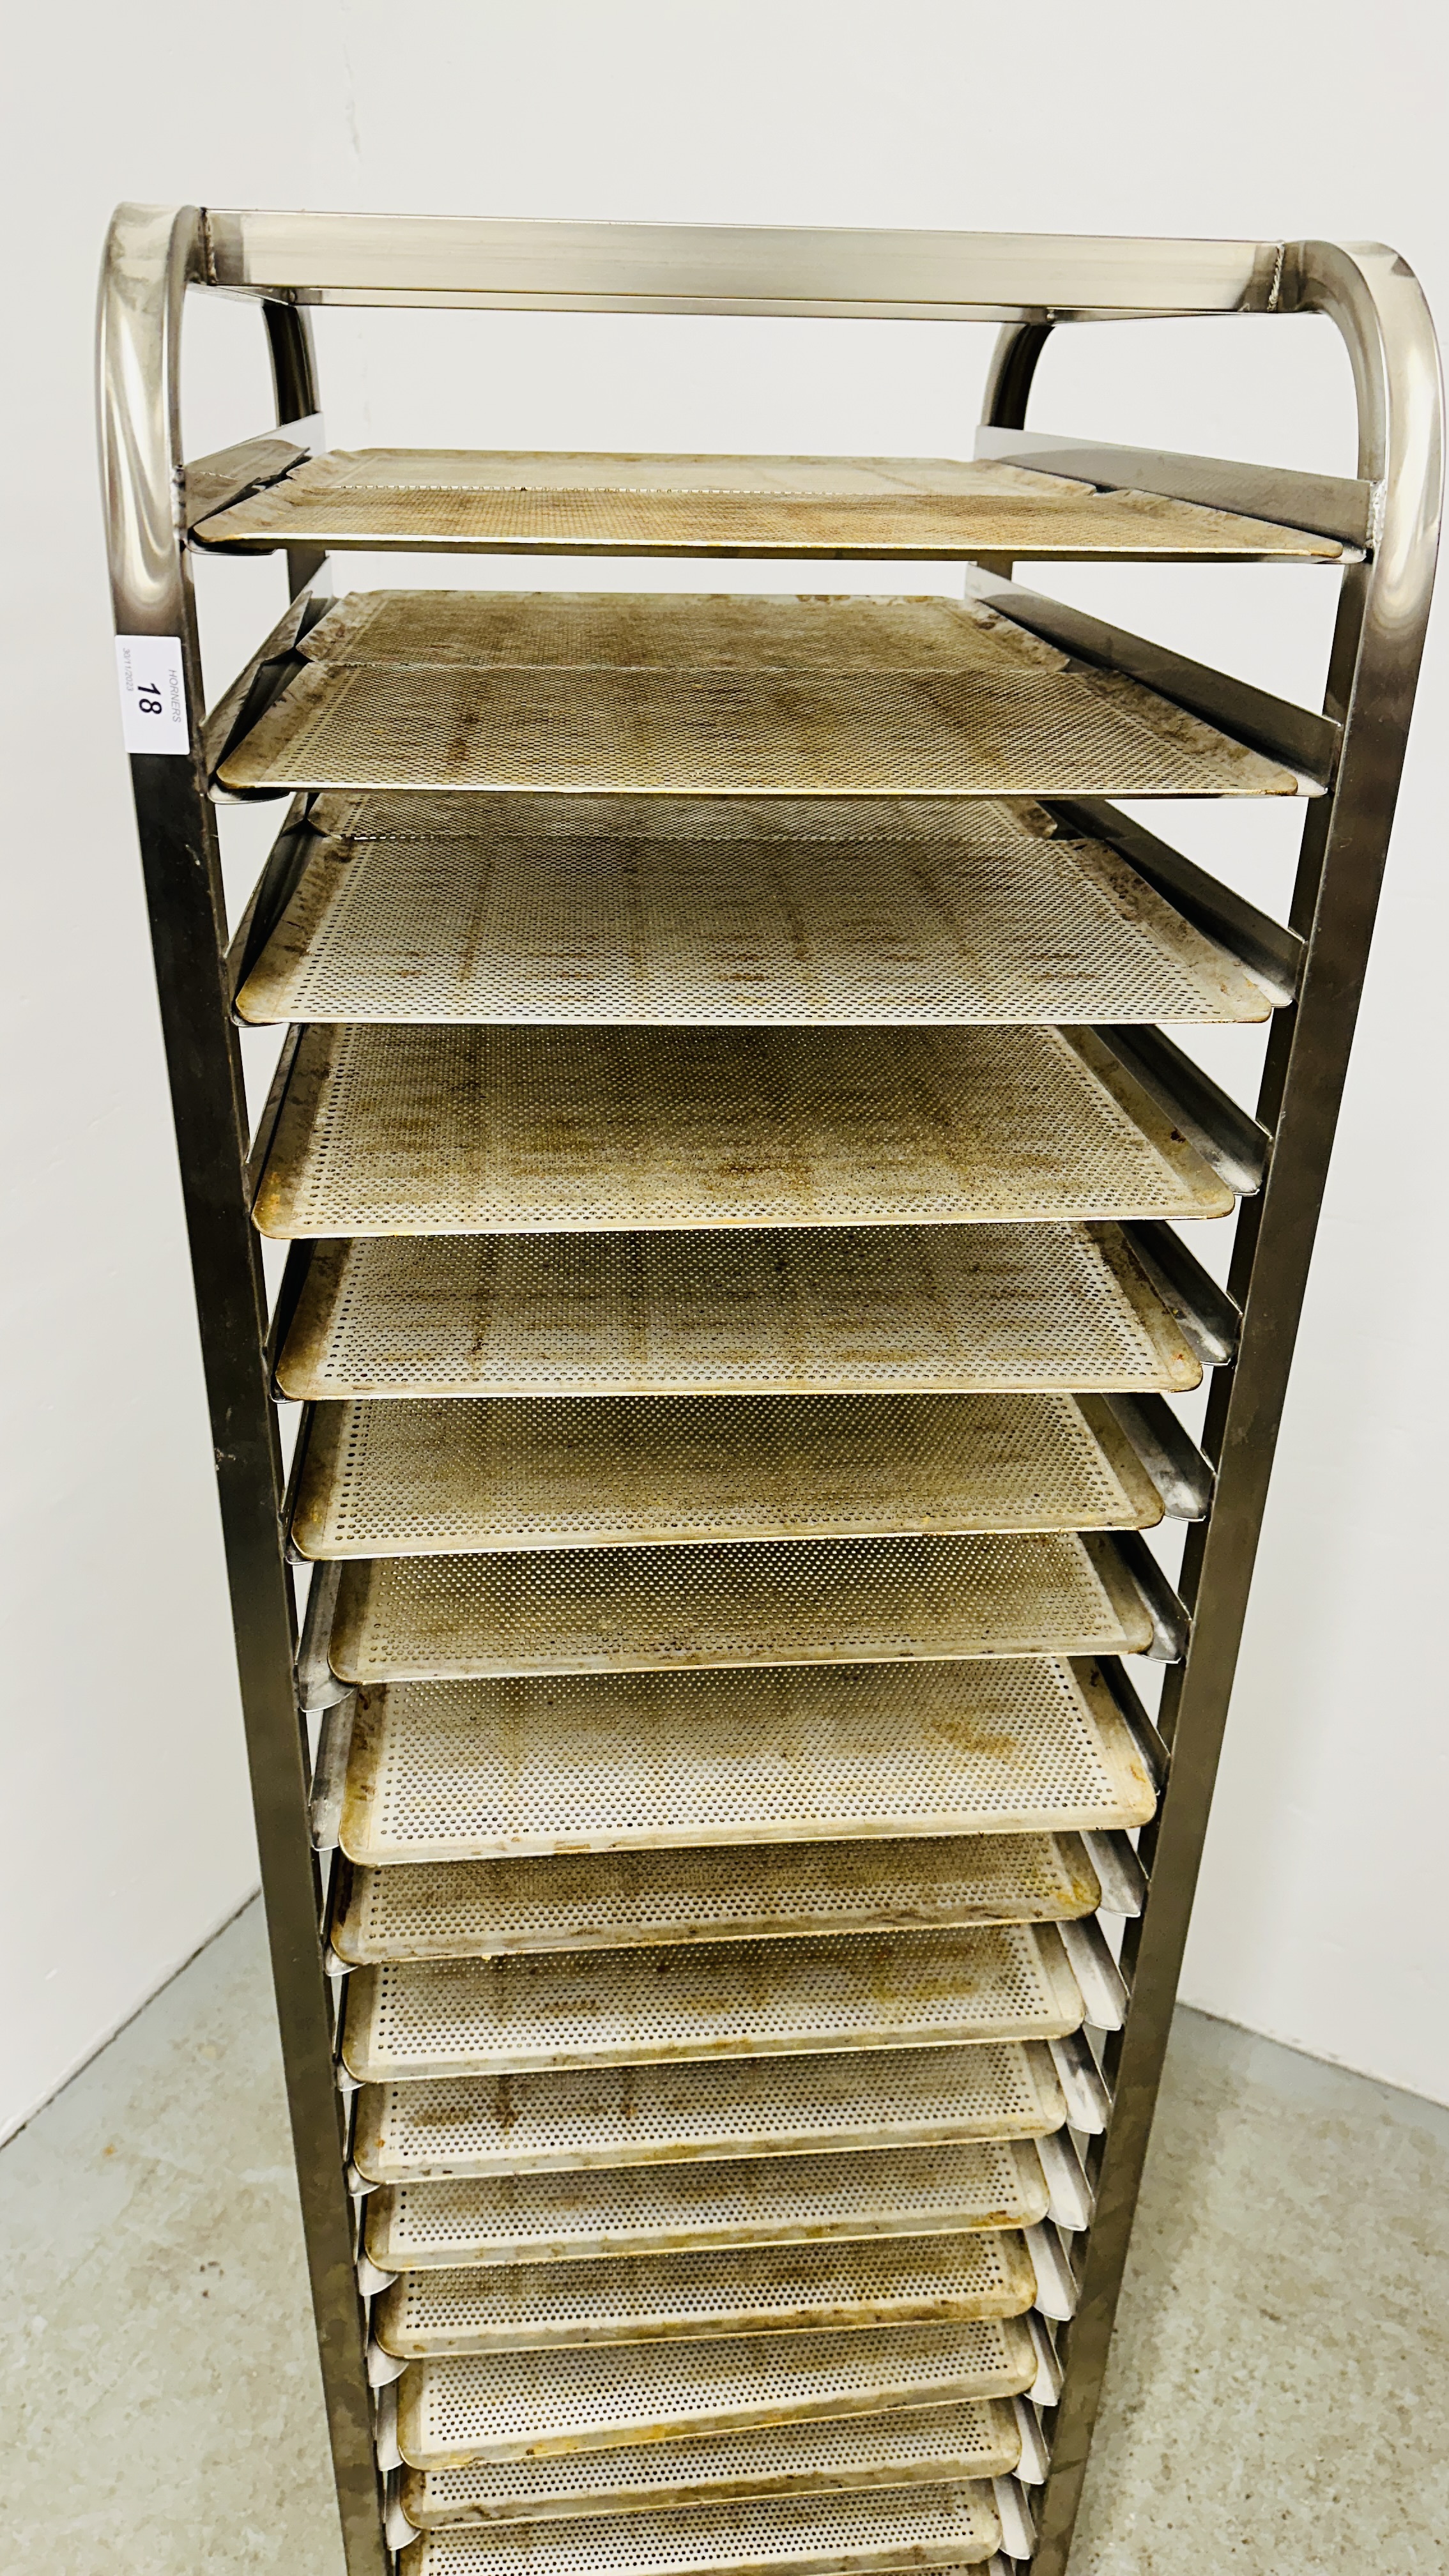 STAINLESS STEEL 20 TIER COMMERCIAL WHEELED BAKING TRAY RACK COMPLETE WITH TRAYS - HEIGHT 182CM. - Image 2 of 7